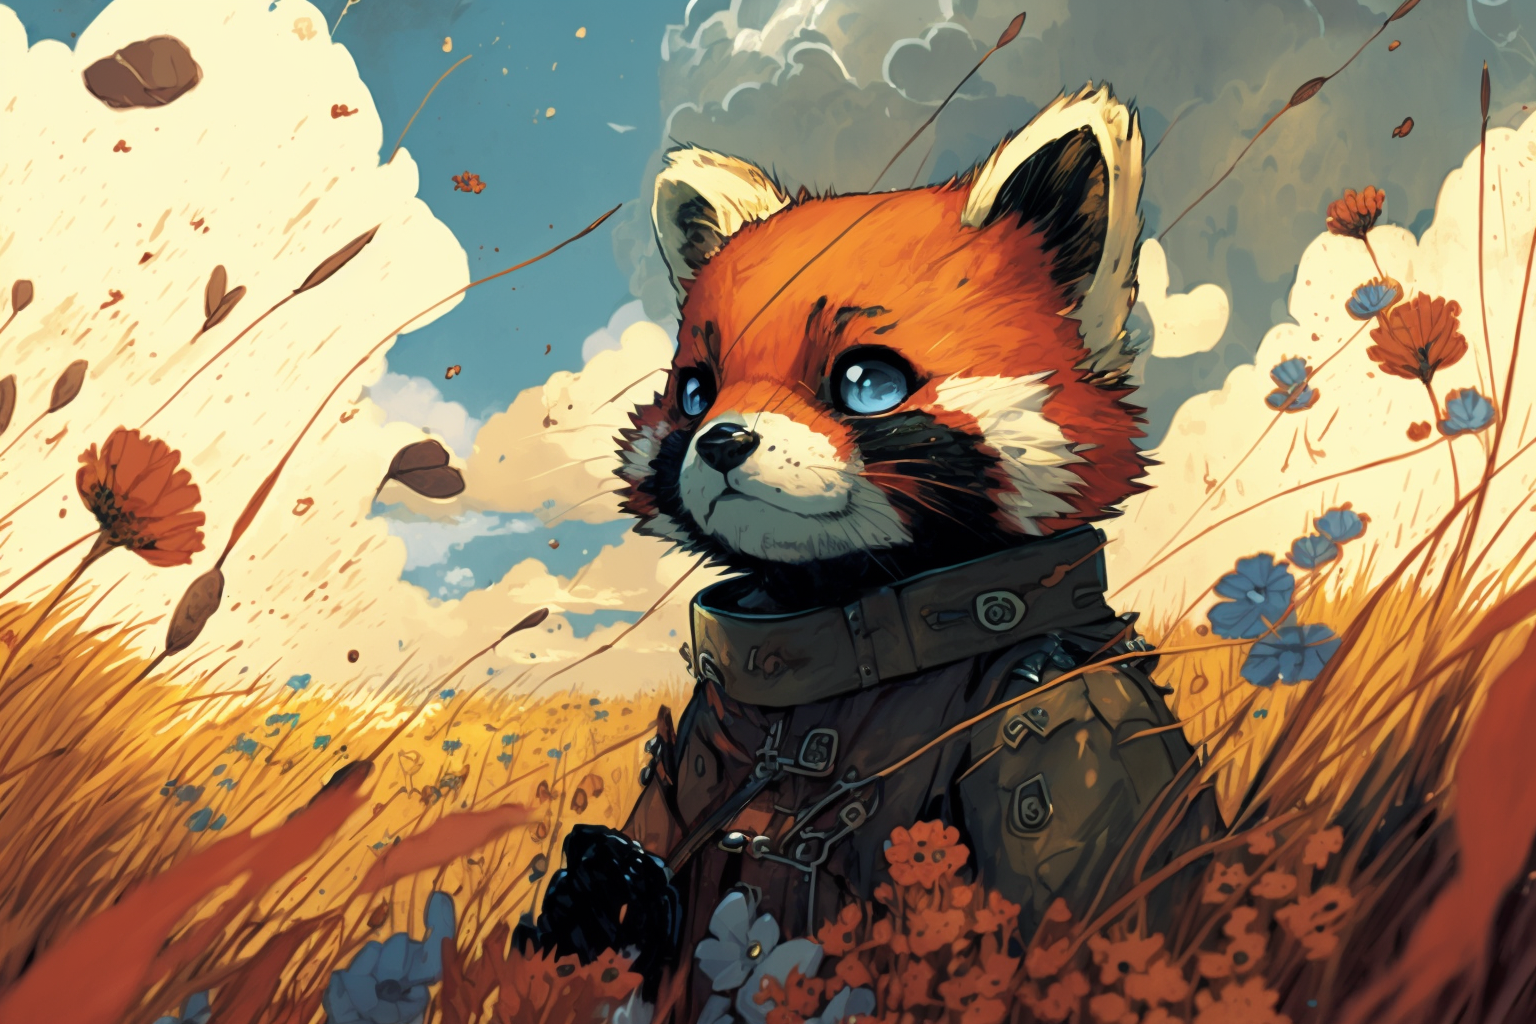 MrNoMbre_a_cute_and_fluffy_red_panda_close_UP_down_view_inside__90db66c8-7a60-4f22-93d9-e1a229cc7521.png